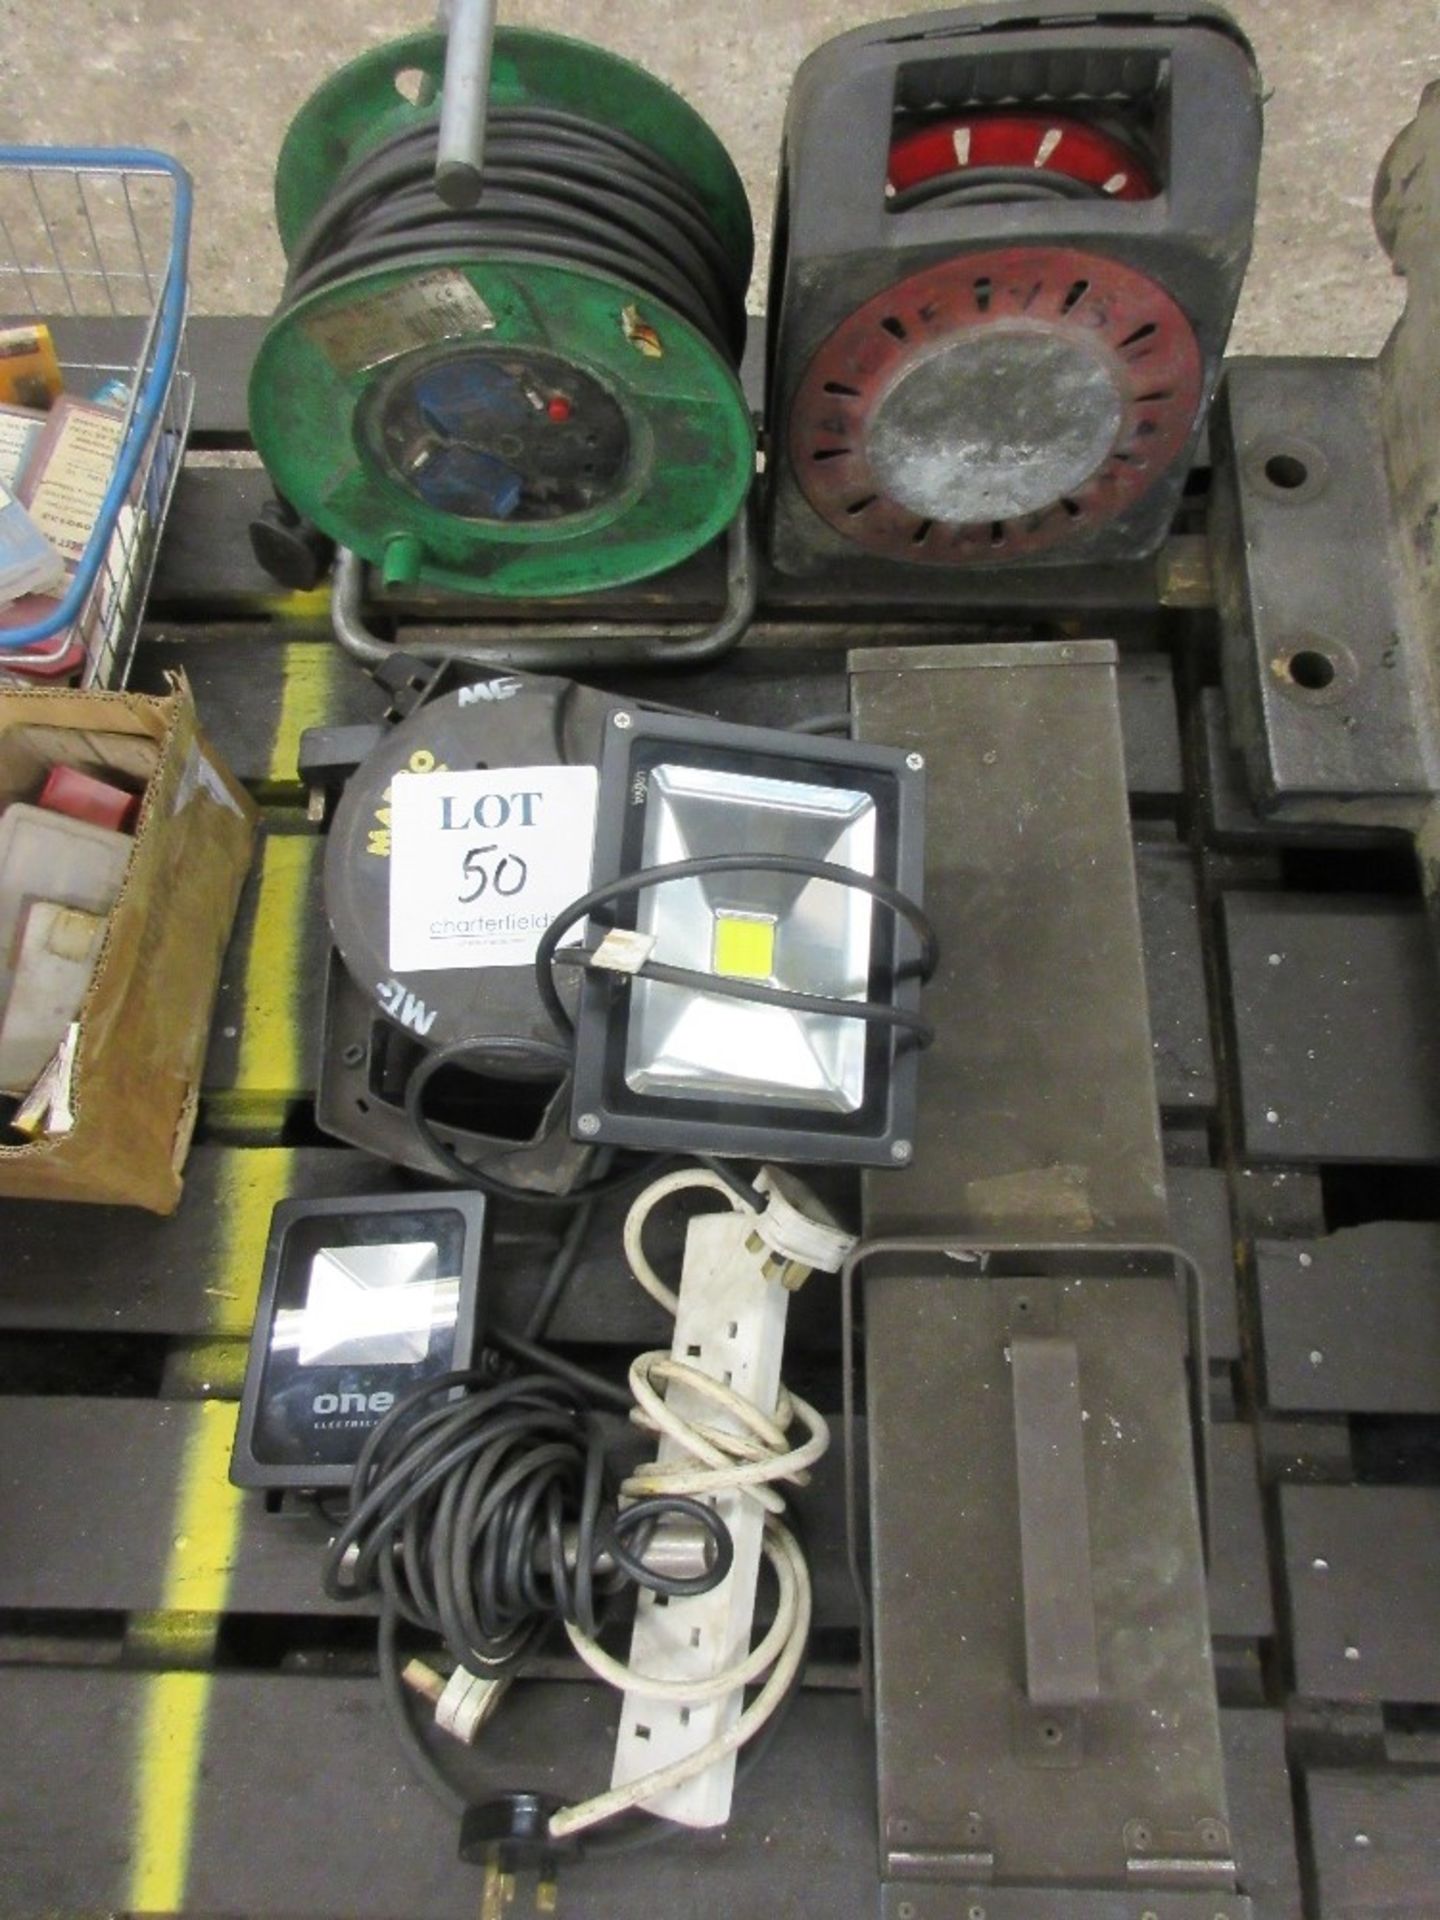 6 - extension lead, 2 LED lights and welding rod oven